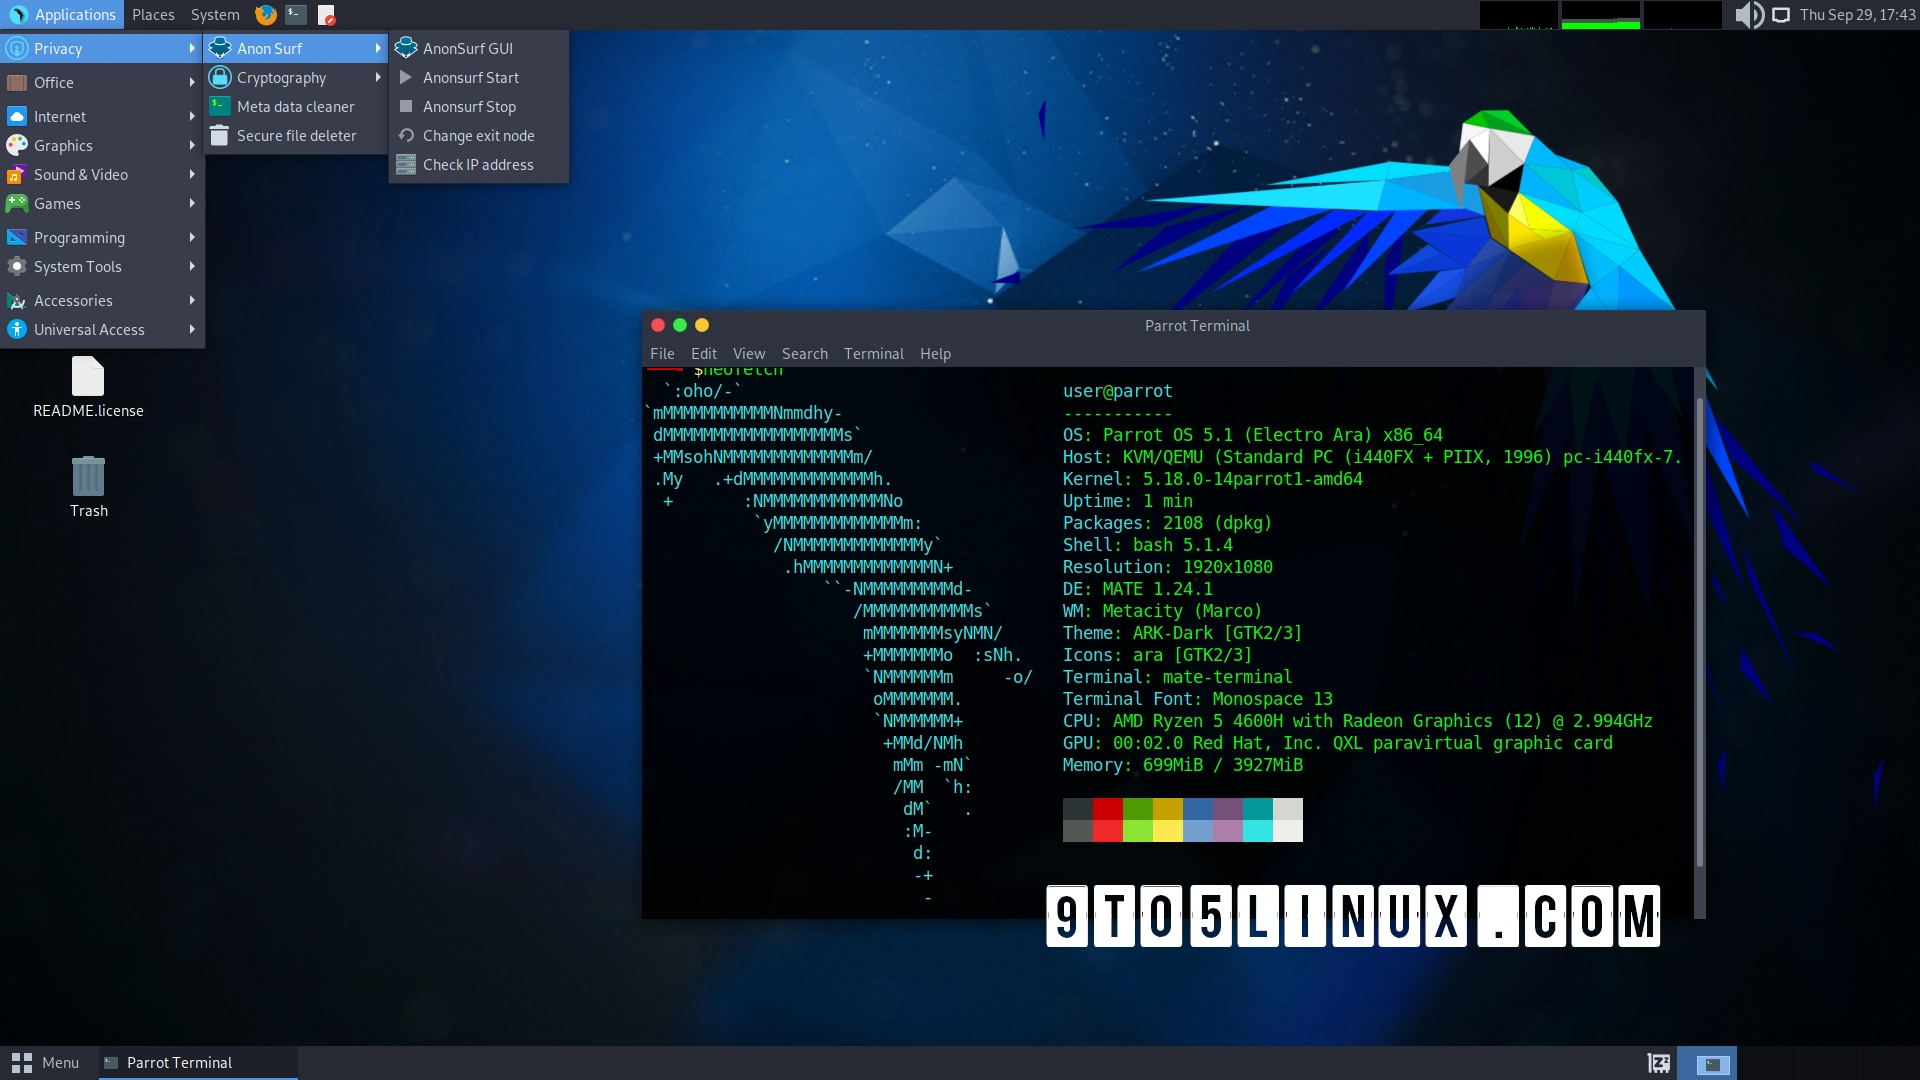 Security-Oriented Distro Parrot 5.1 Arrives with AnonSurf 4, Linux Kernel 5.18, and More